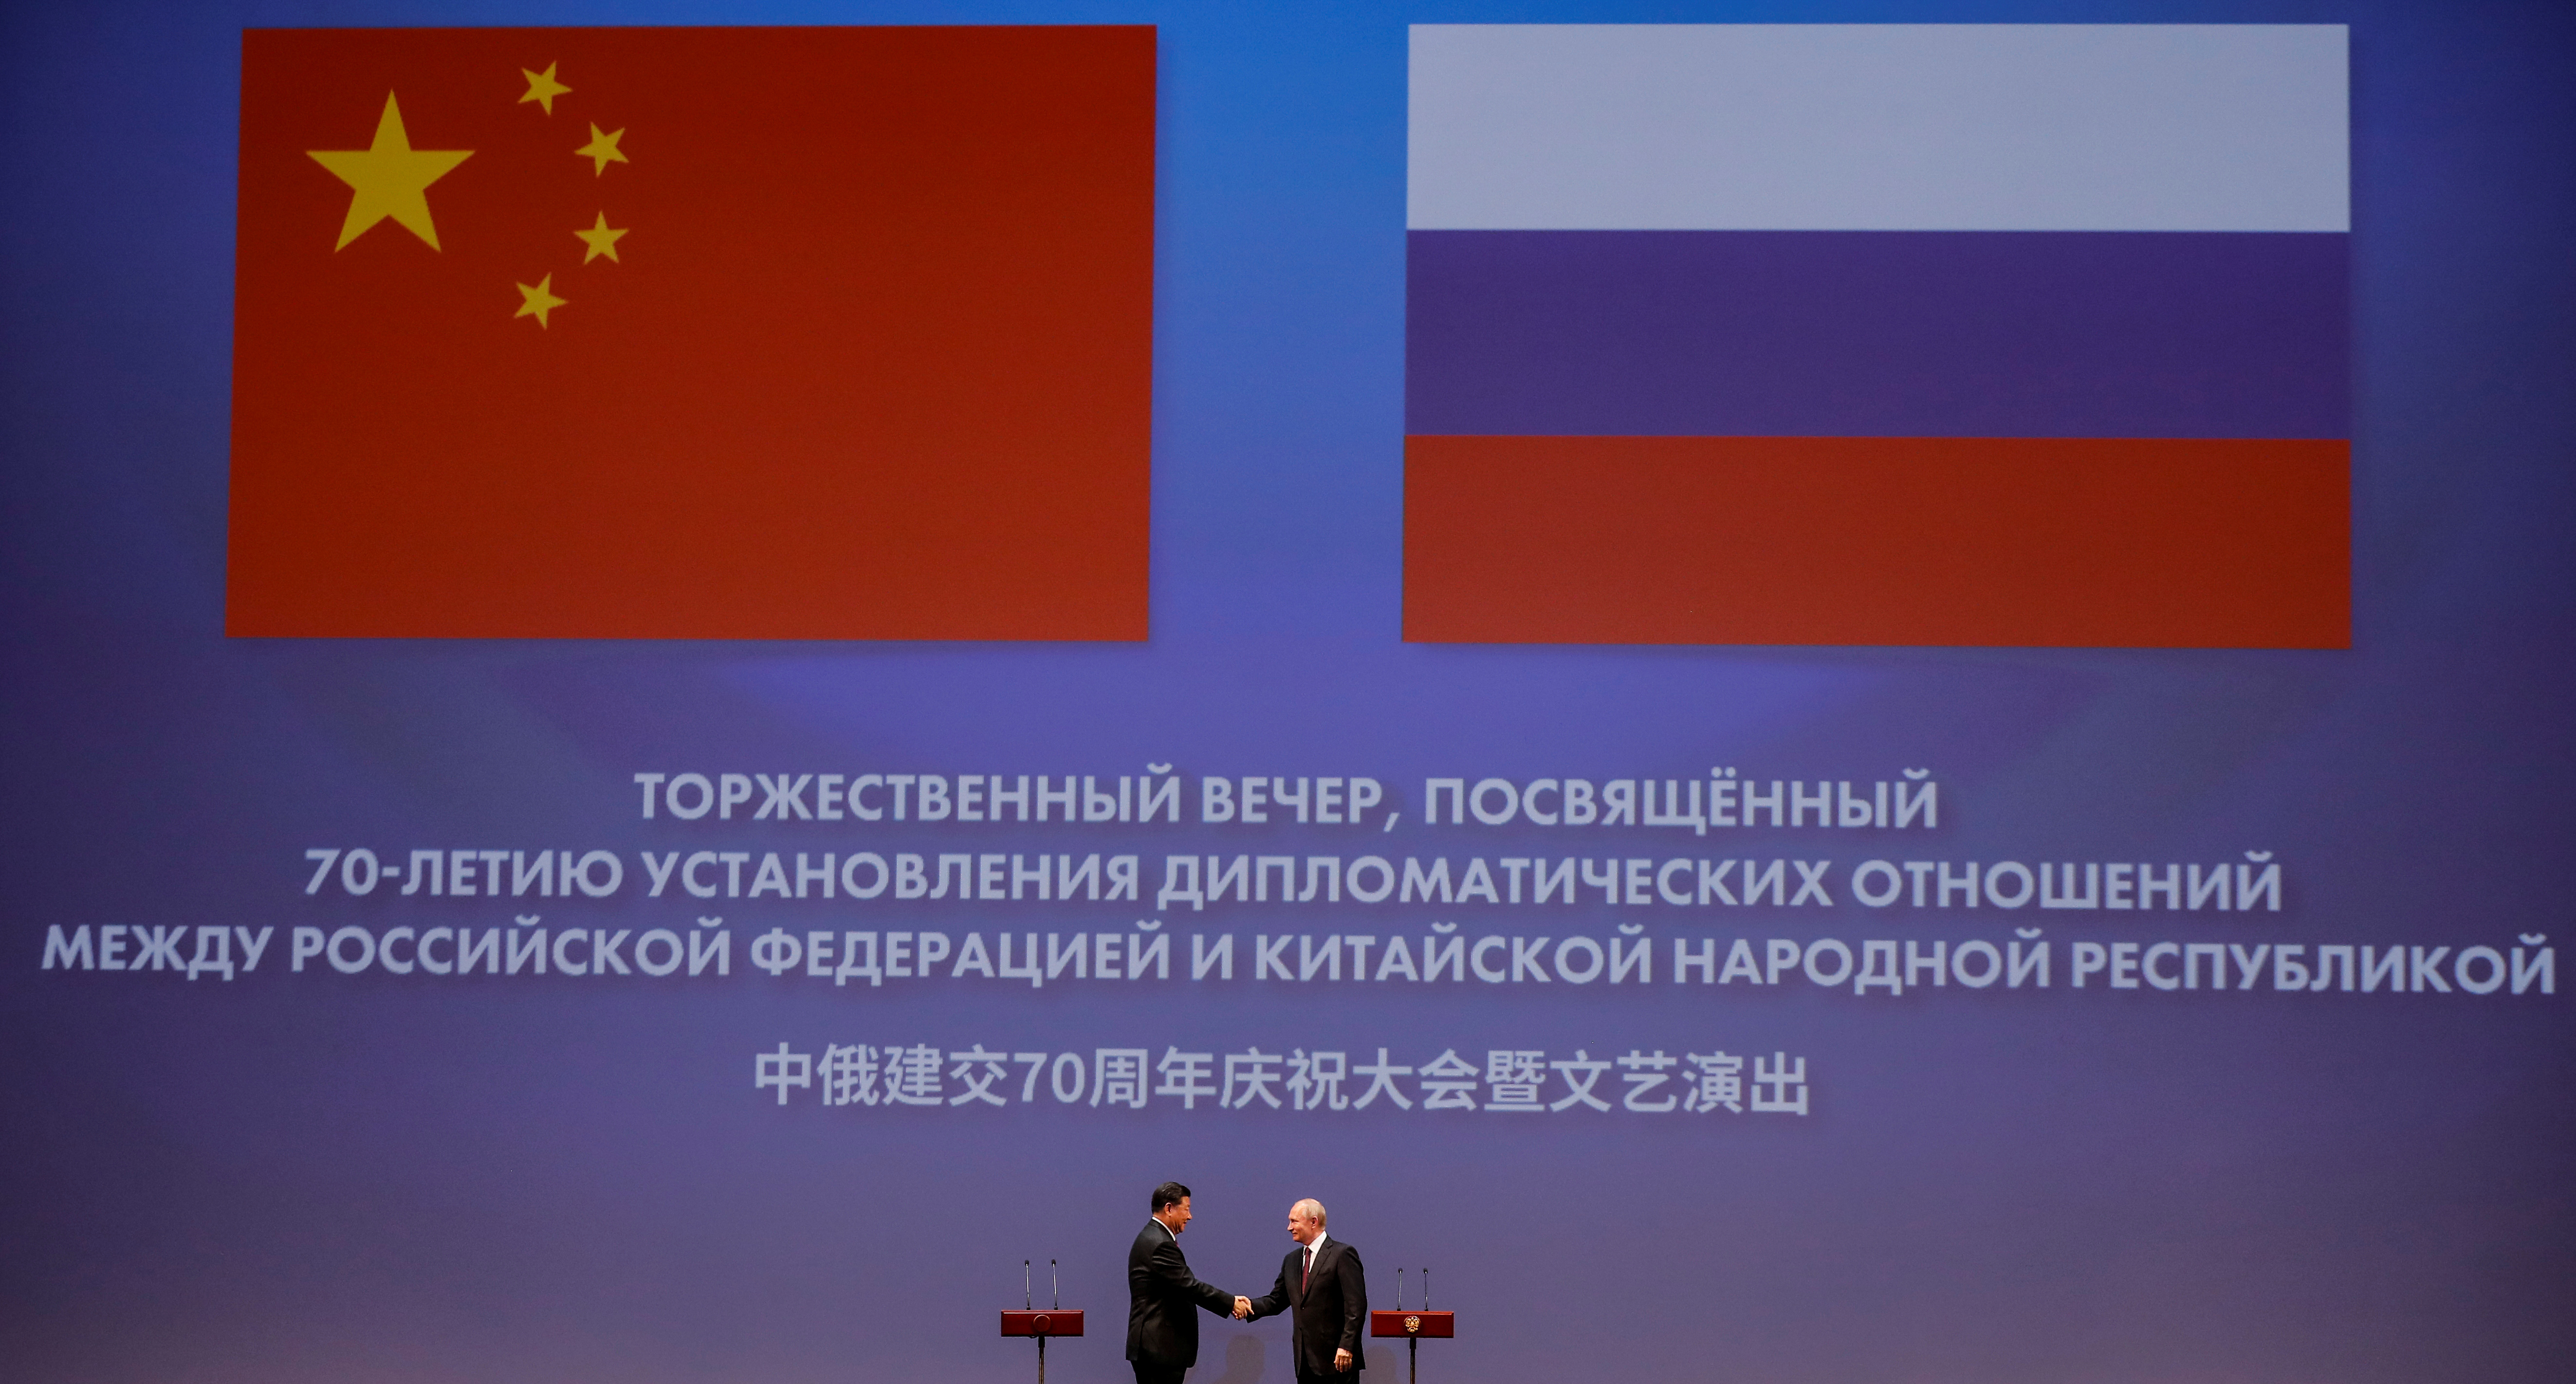 Chinese President Xi Jinping and Russian President Vladimir Putin shake hands during a ceremony dedicated to the 70th anniversary of the establishment of diplomatic relations between Russia and China, in Bolshoi Theatre in Moscow, Russia June 5, 2019. Sergei Ilnitsky/Pool via Reuters